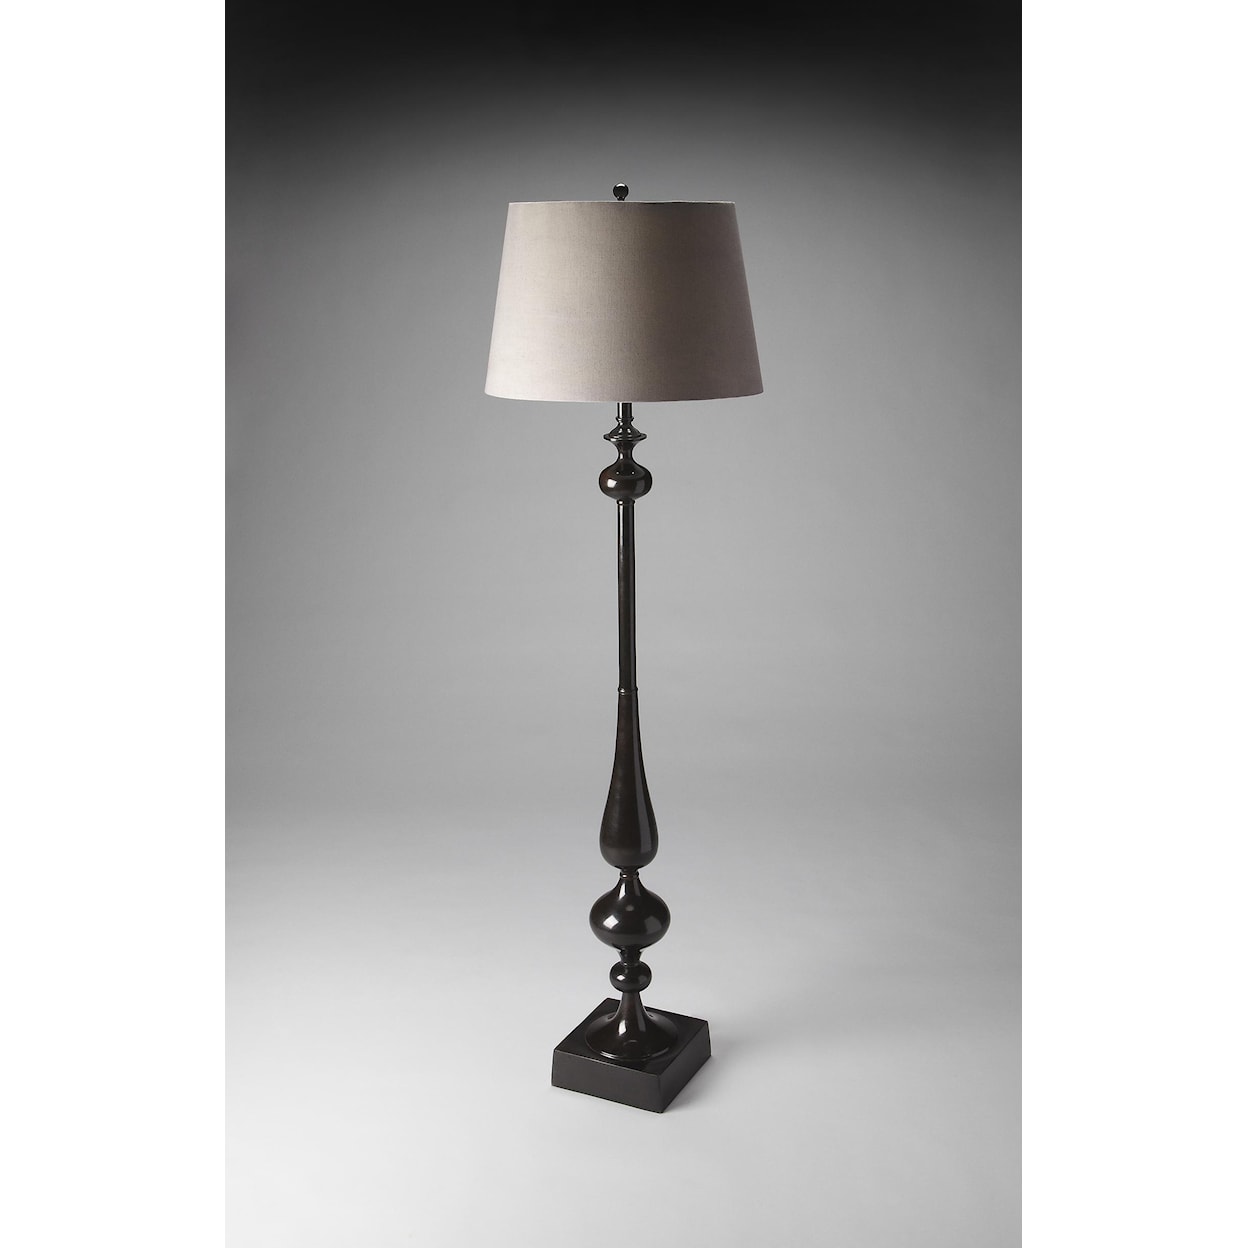 Butler Specialty Company Hors D'oeuvres Floor Lamp